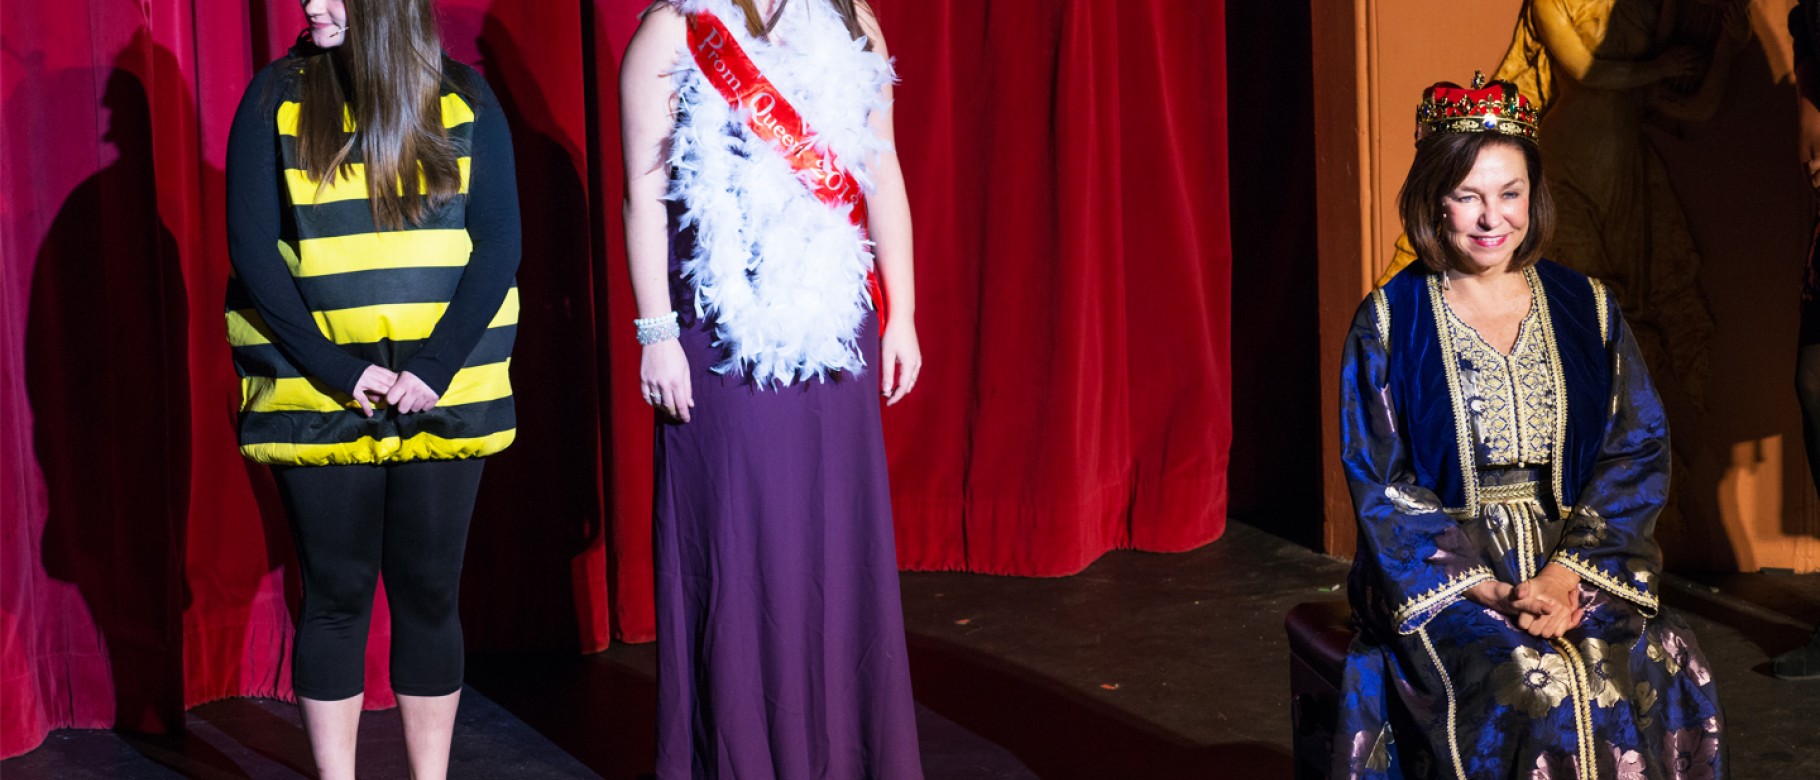 UNE President Danielle Ripich plays the "UNE Queen" in a skit in Doc Samuel's Variety Show